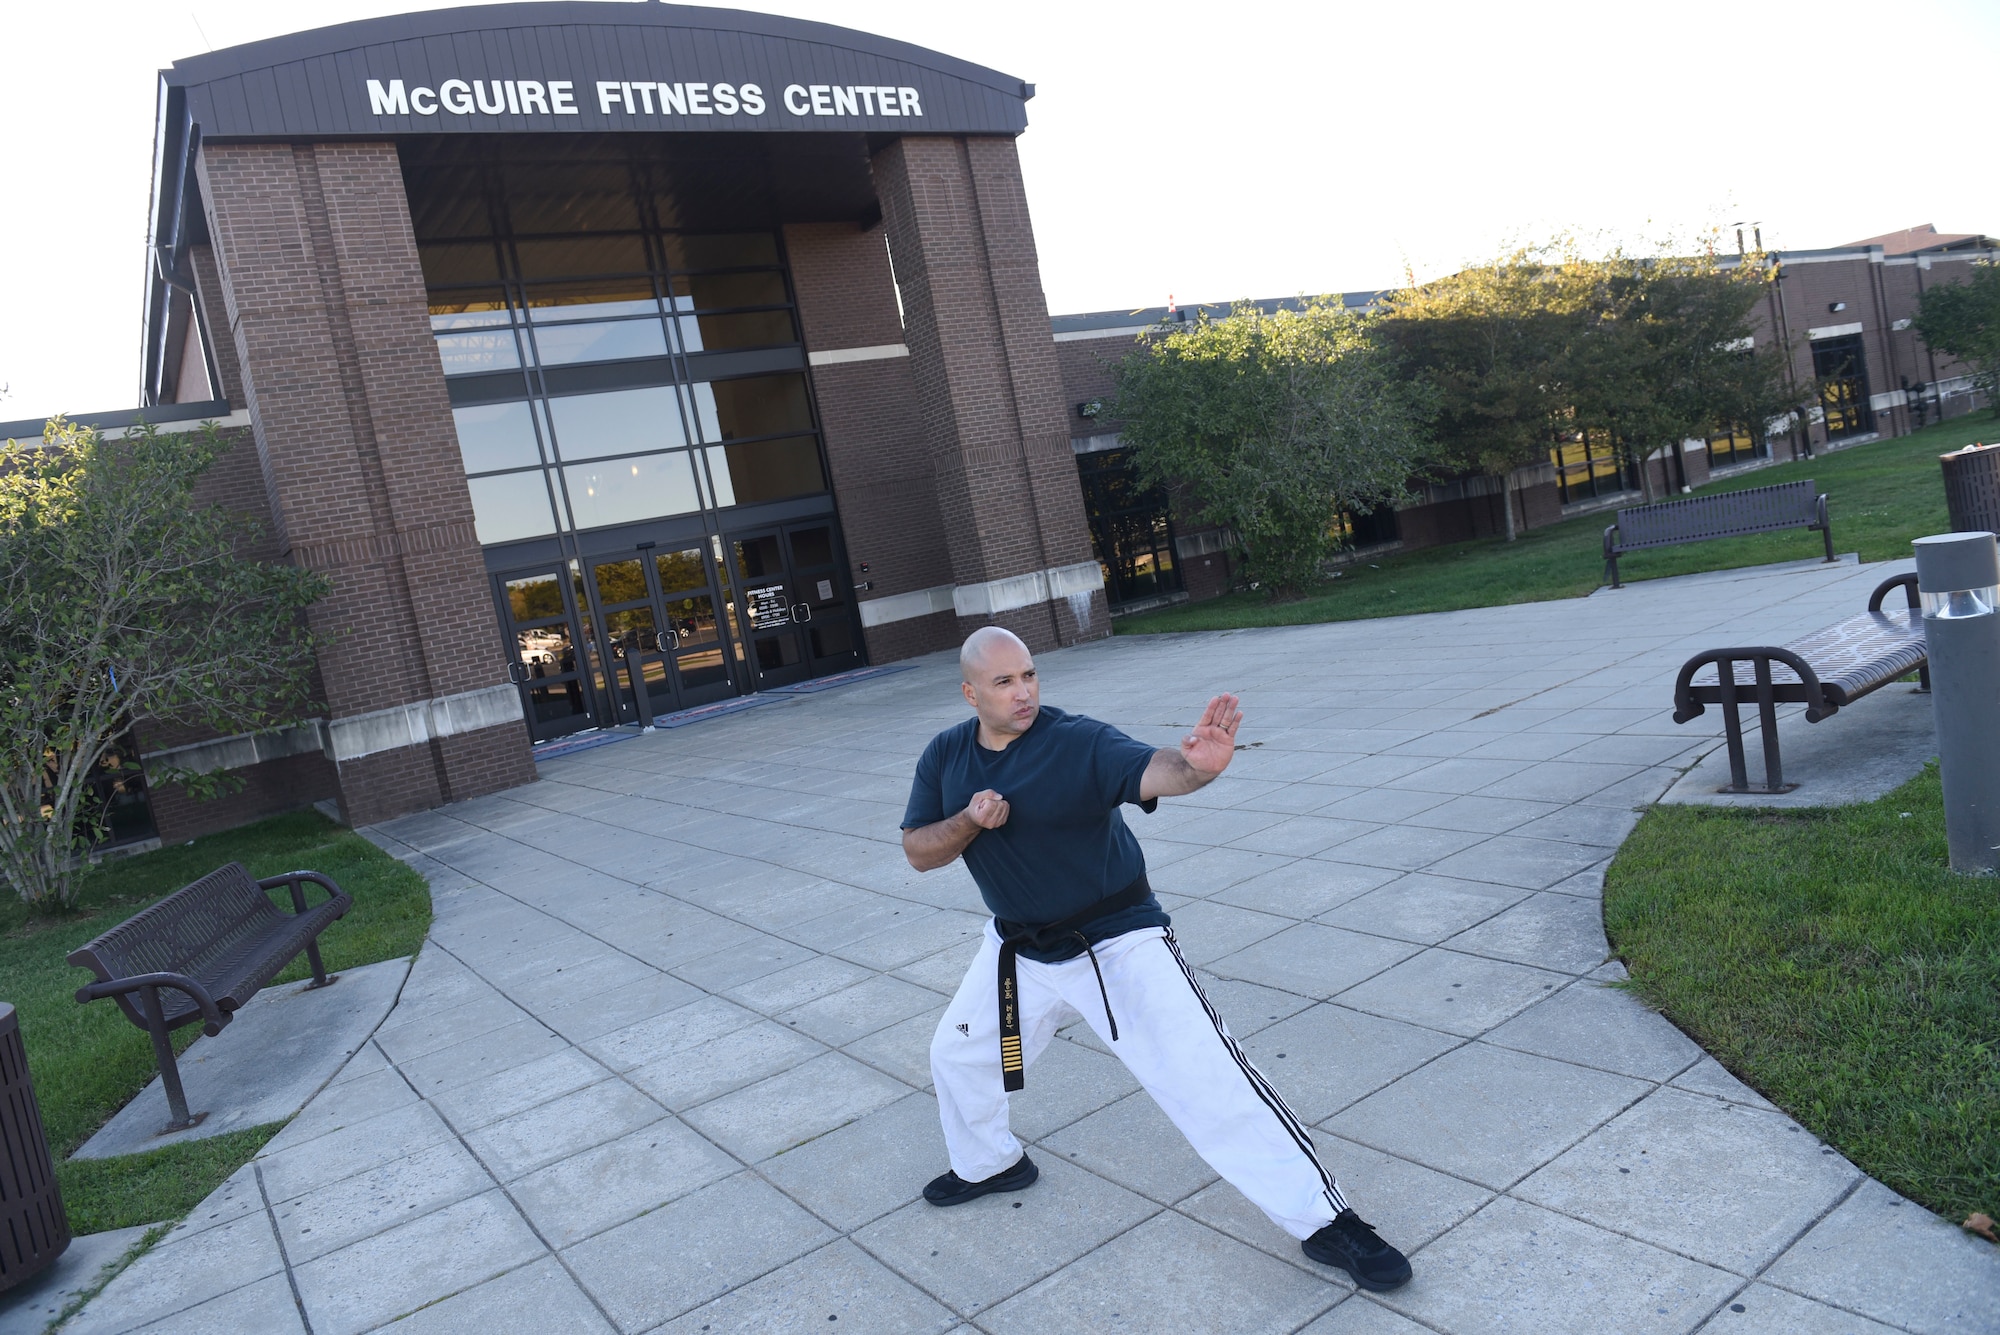 Staff Sergeant David Correa practices martial arts in front of the McGuire Fitness Center while wearing a black t-shirt, black belt, white pants, and black sneakers.